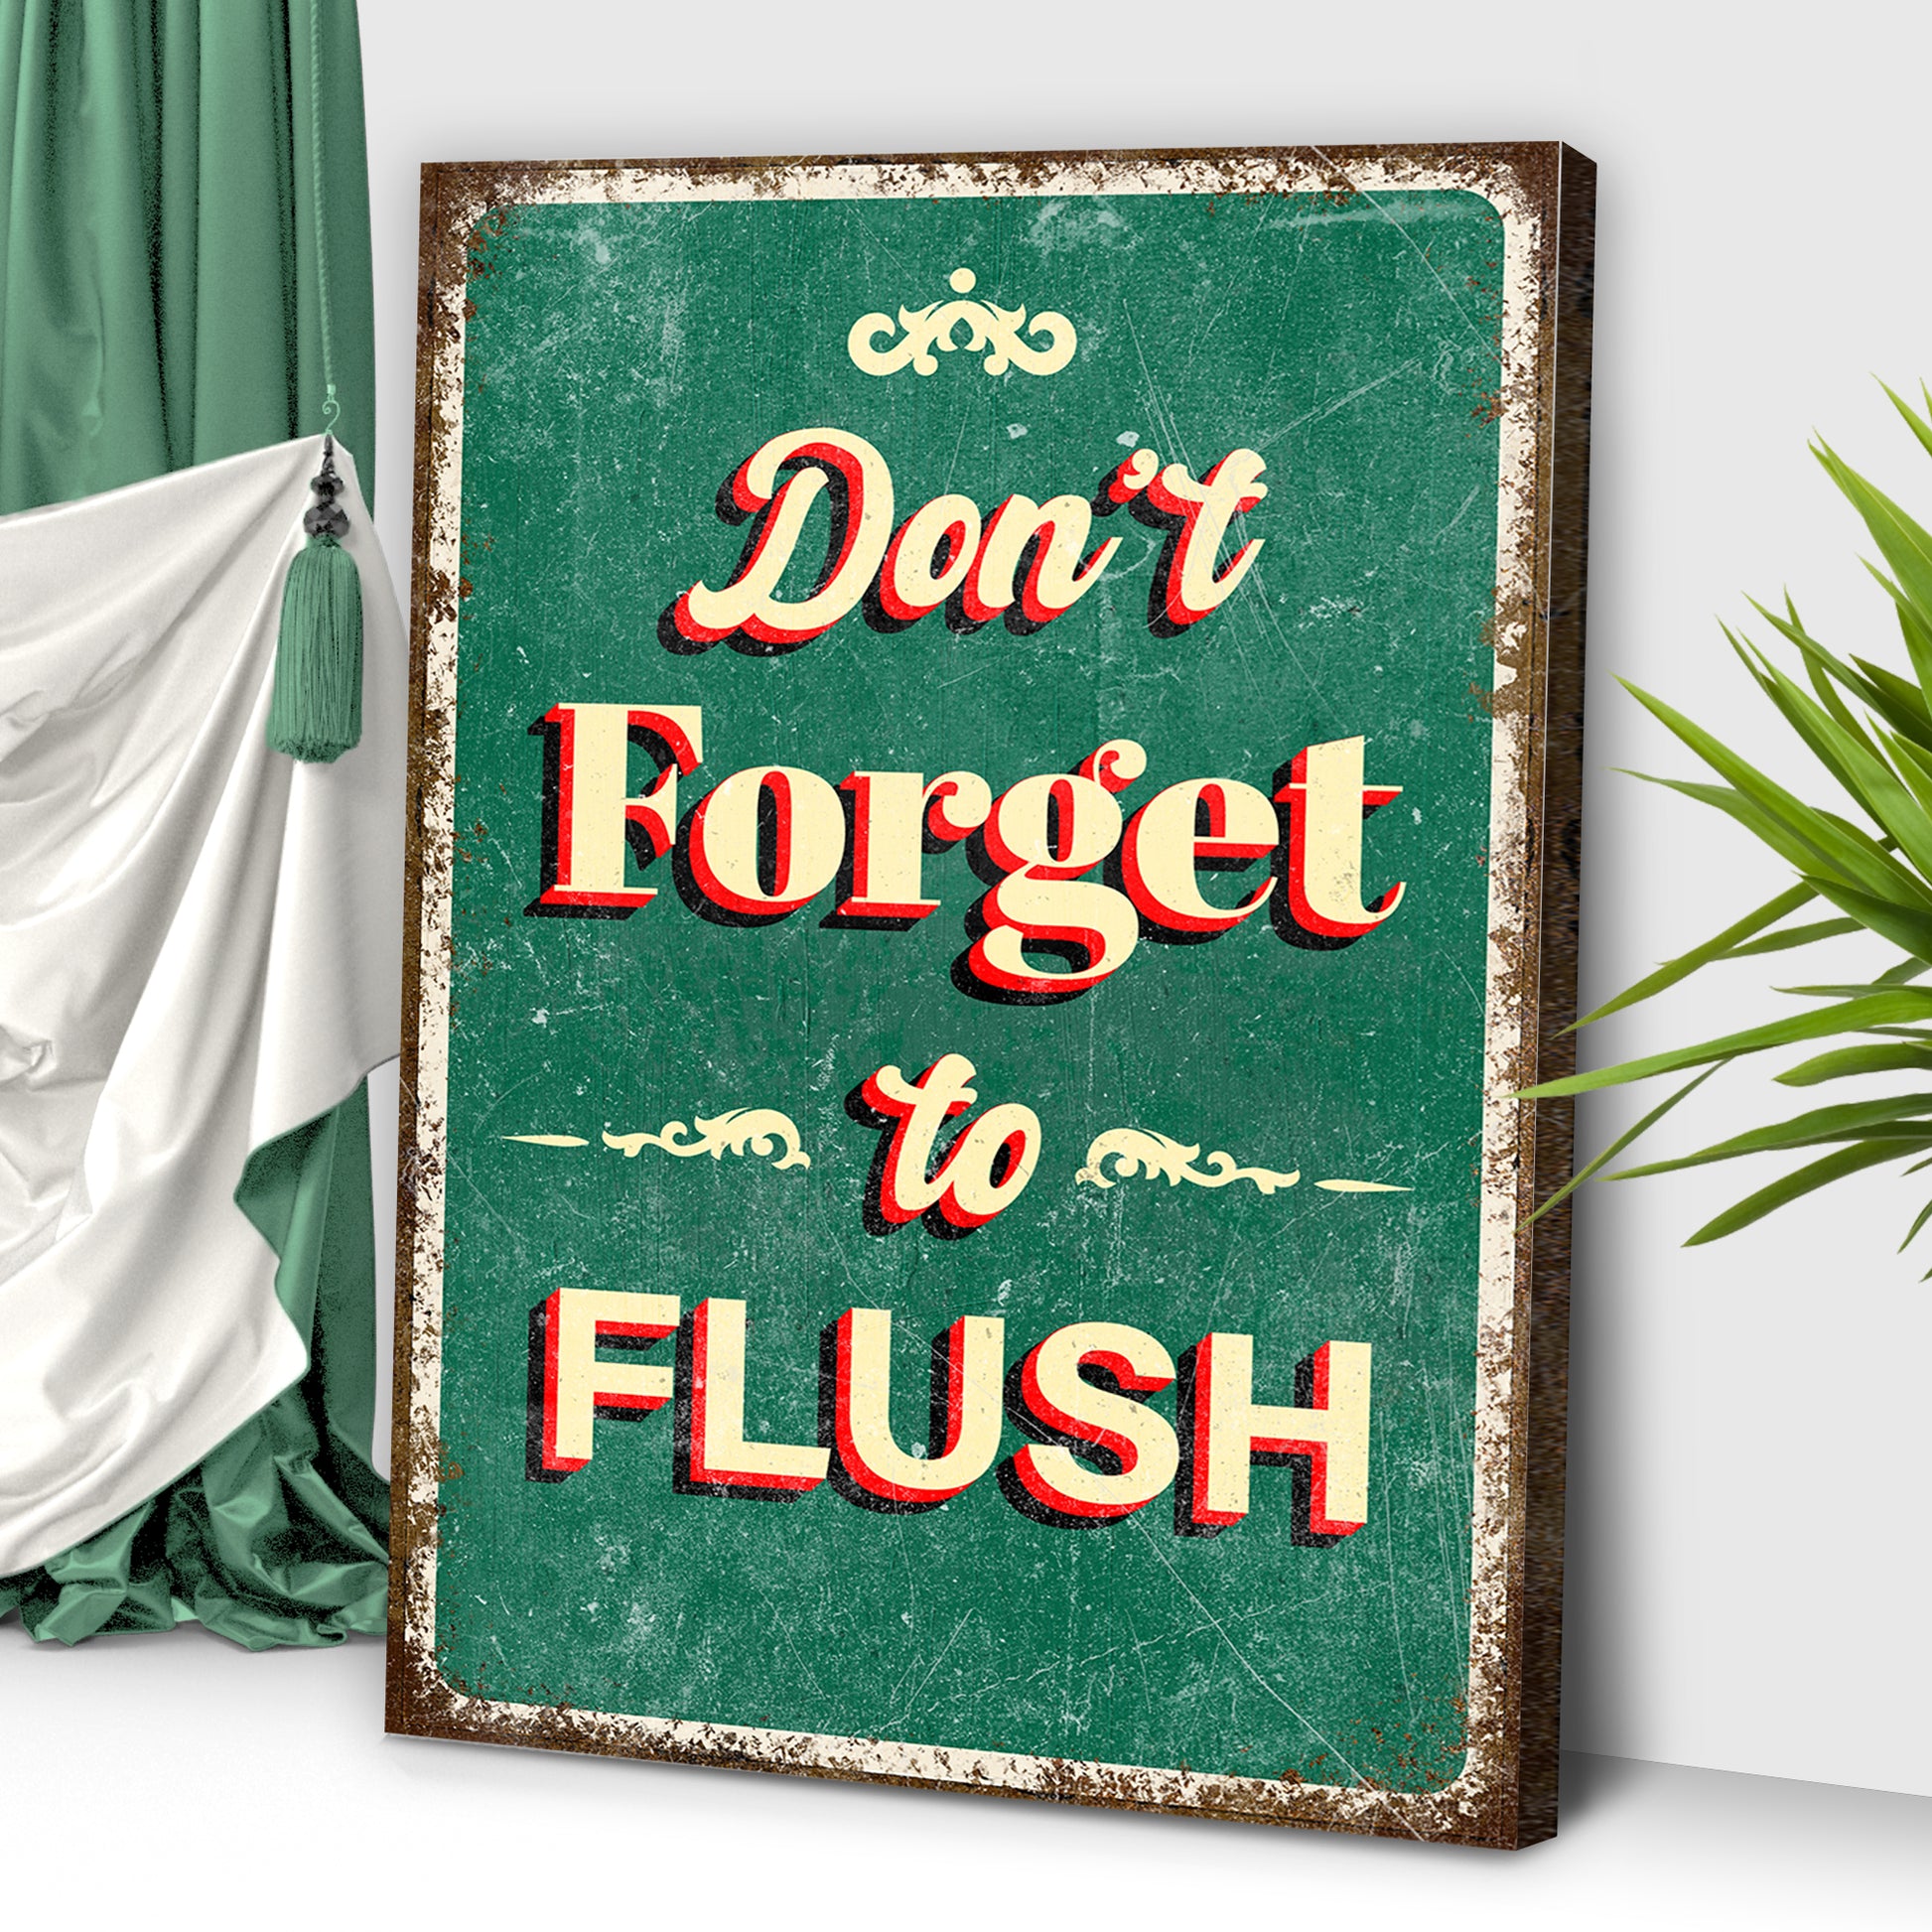 Flush Toilet Sign III  - Image by Tailored Canvases